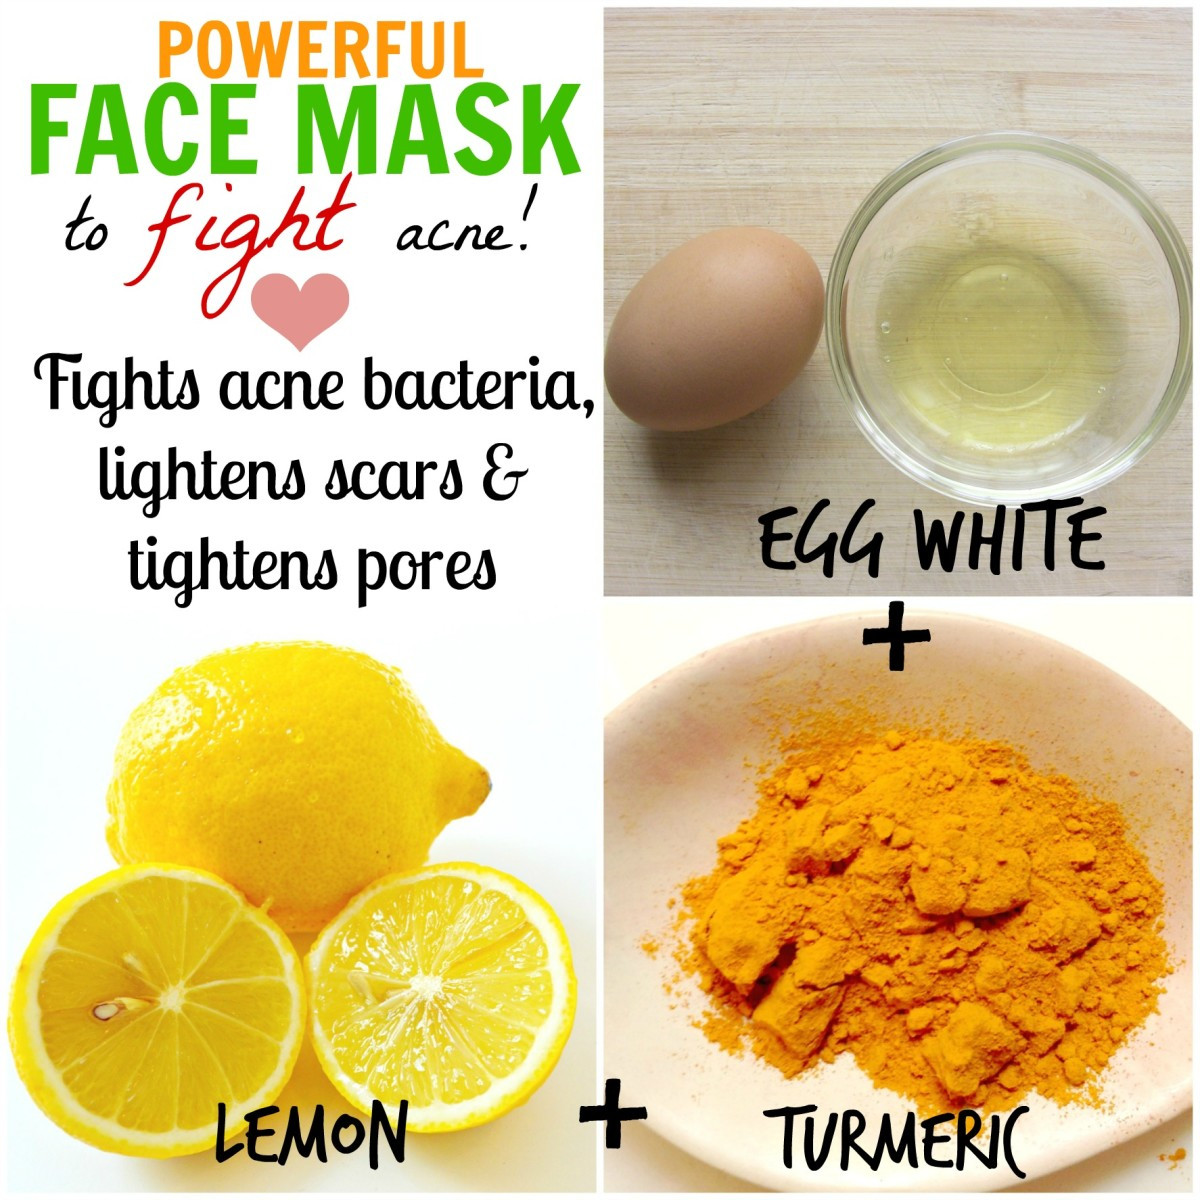 Acne Face Mask DIY
 DIY Homemade Face Masks for Acne How to Stop Pimples